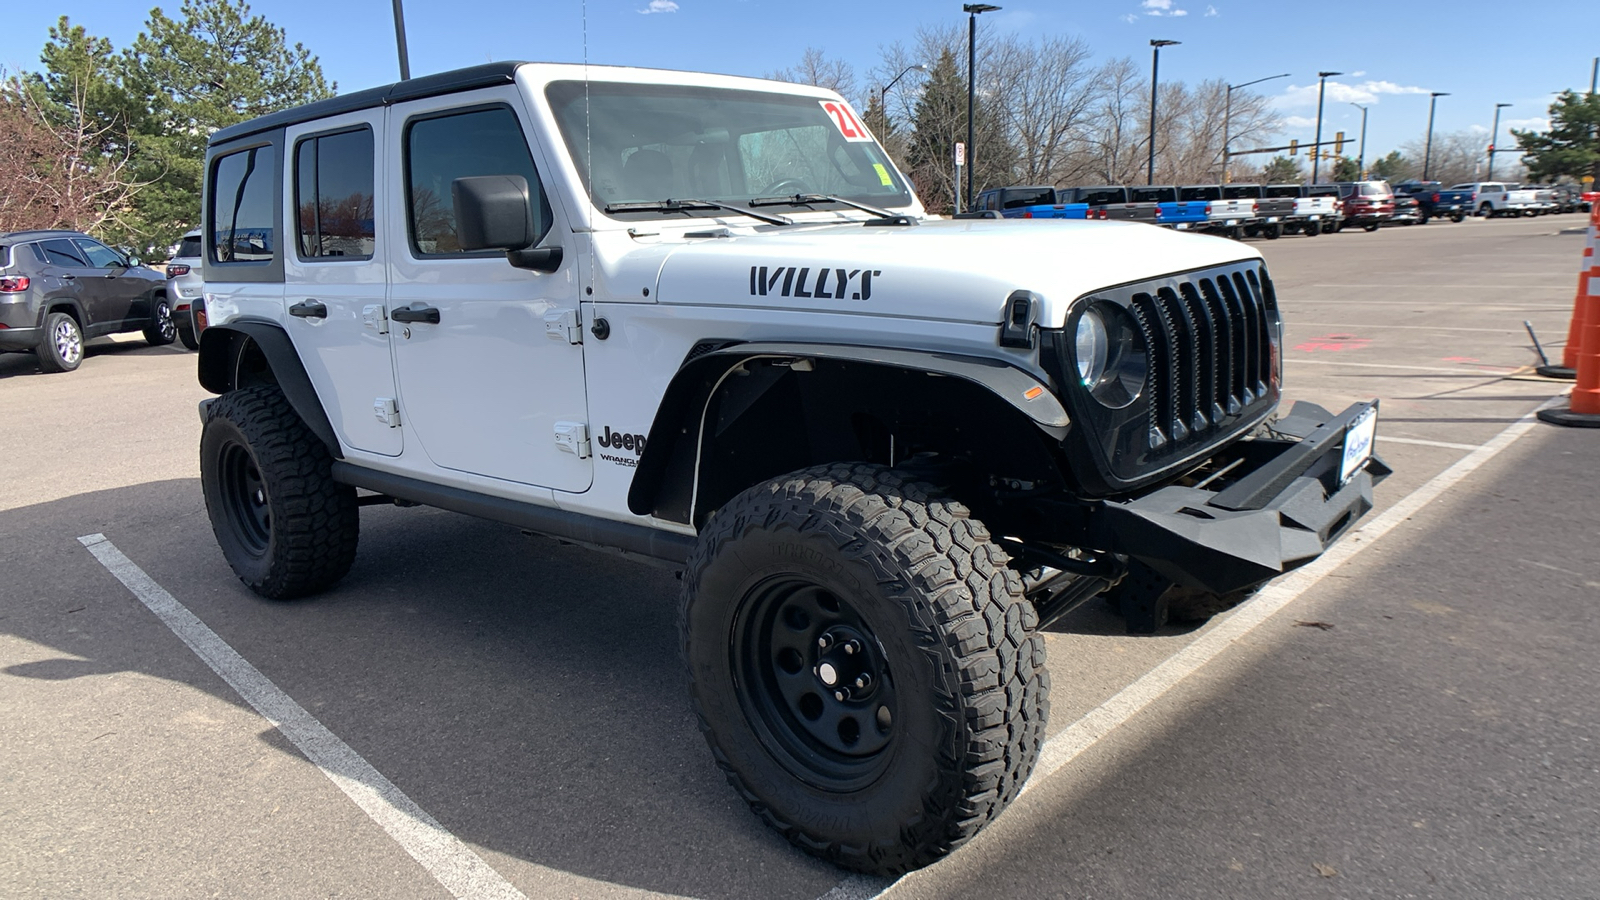 2021 Jeep Wrangler Unlimited Willys Sport 4